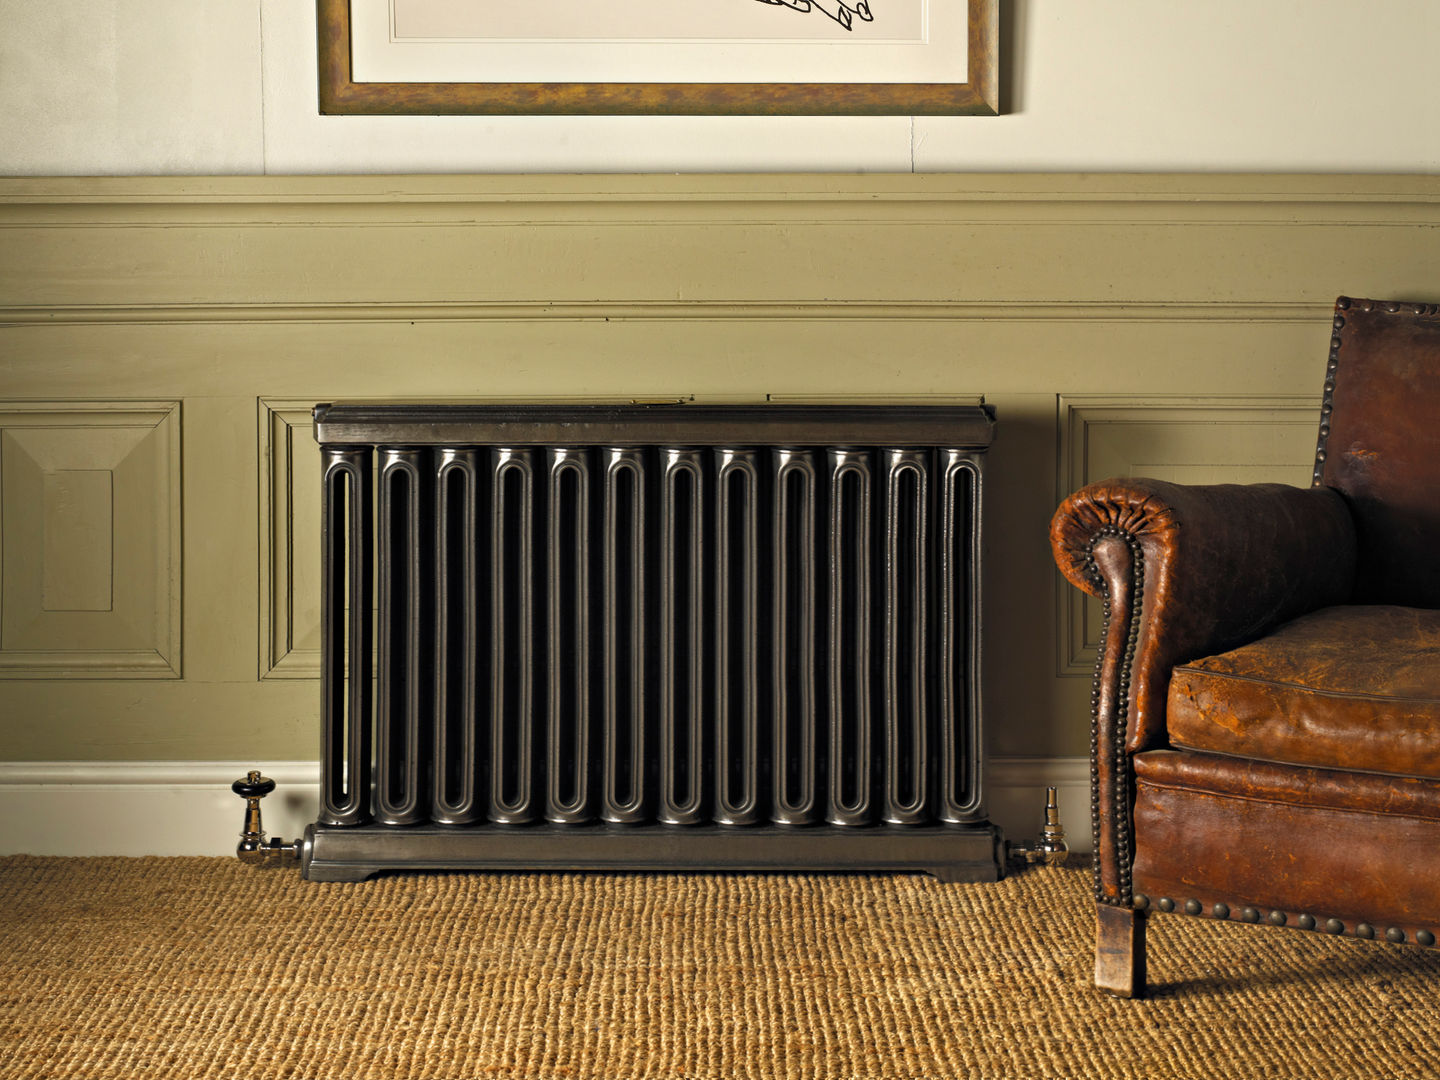 Radiators, Vintage and Architectural Vintage and Architectural Modern living room Accessories & decoration